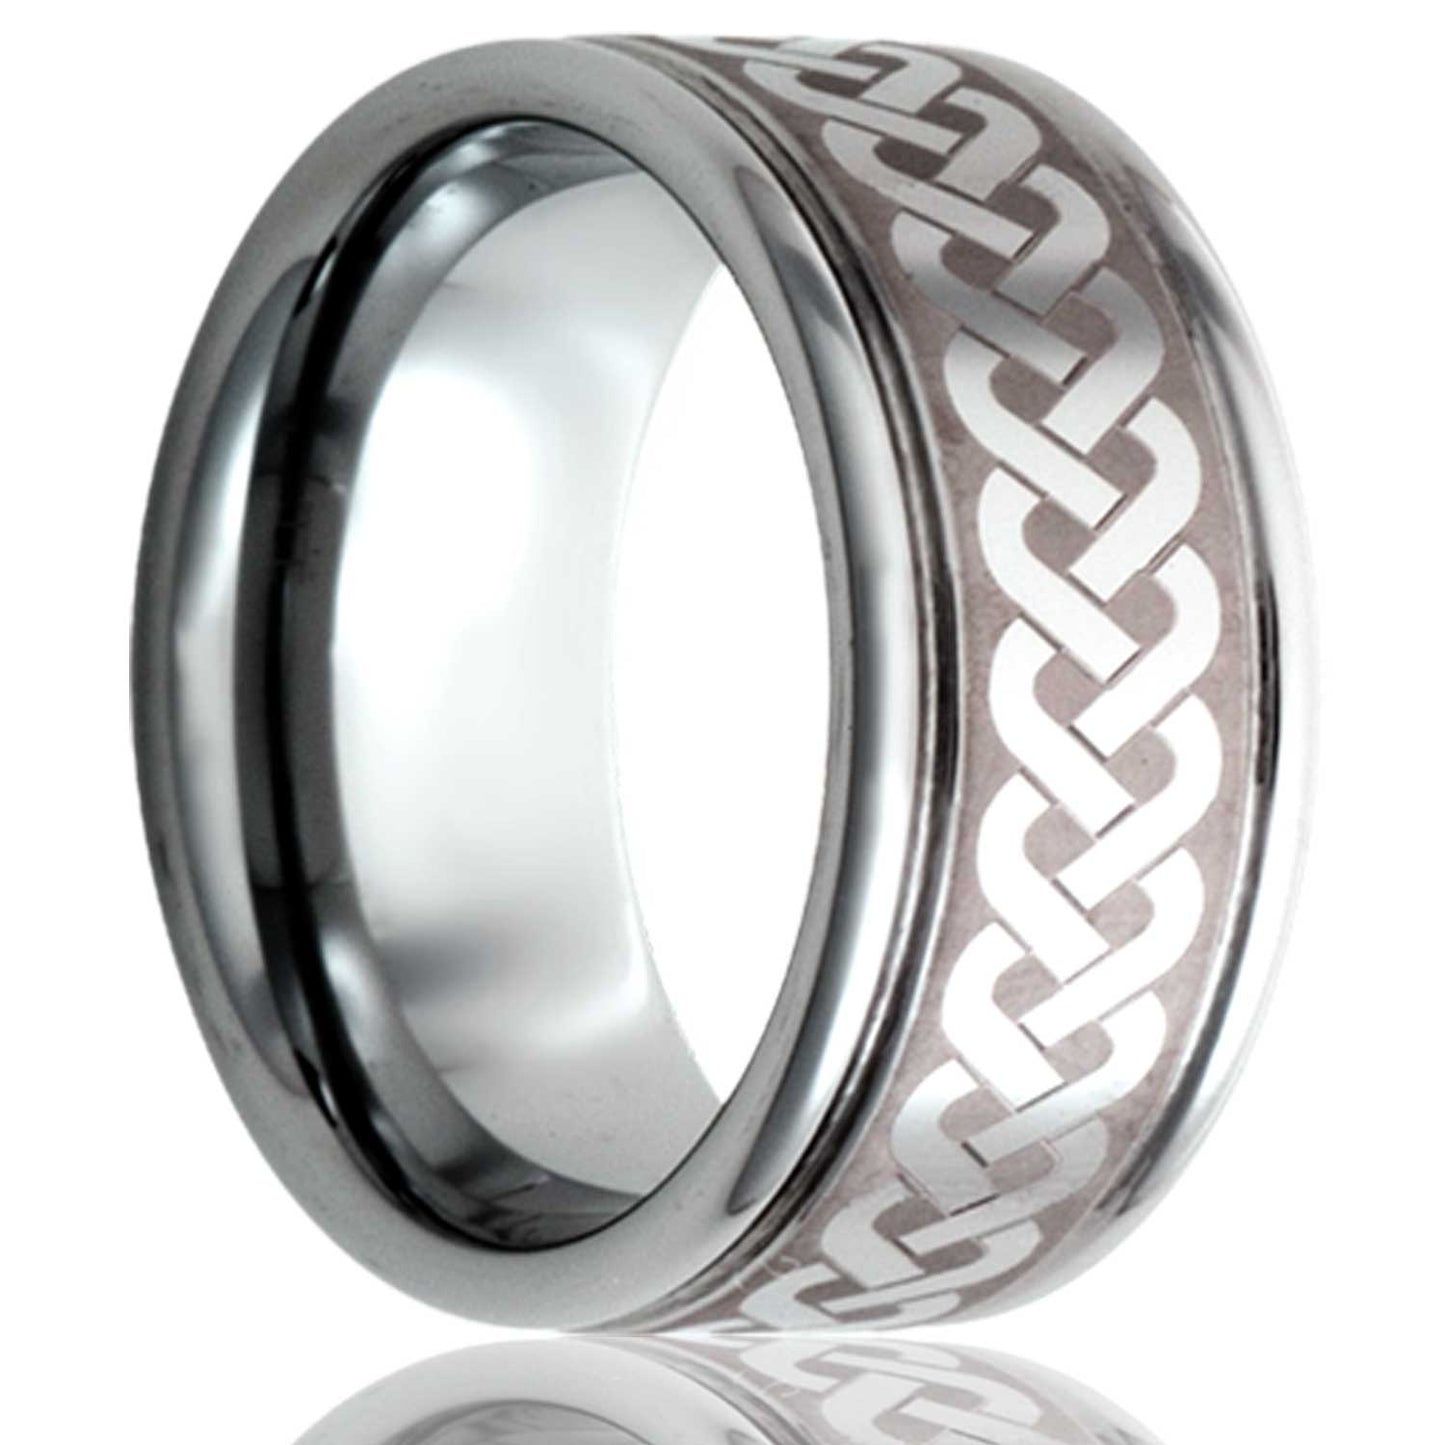 A sailor's celtic knot grooved cobalt wedding band displayed on a neutral white background.